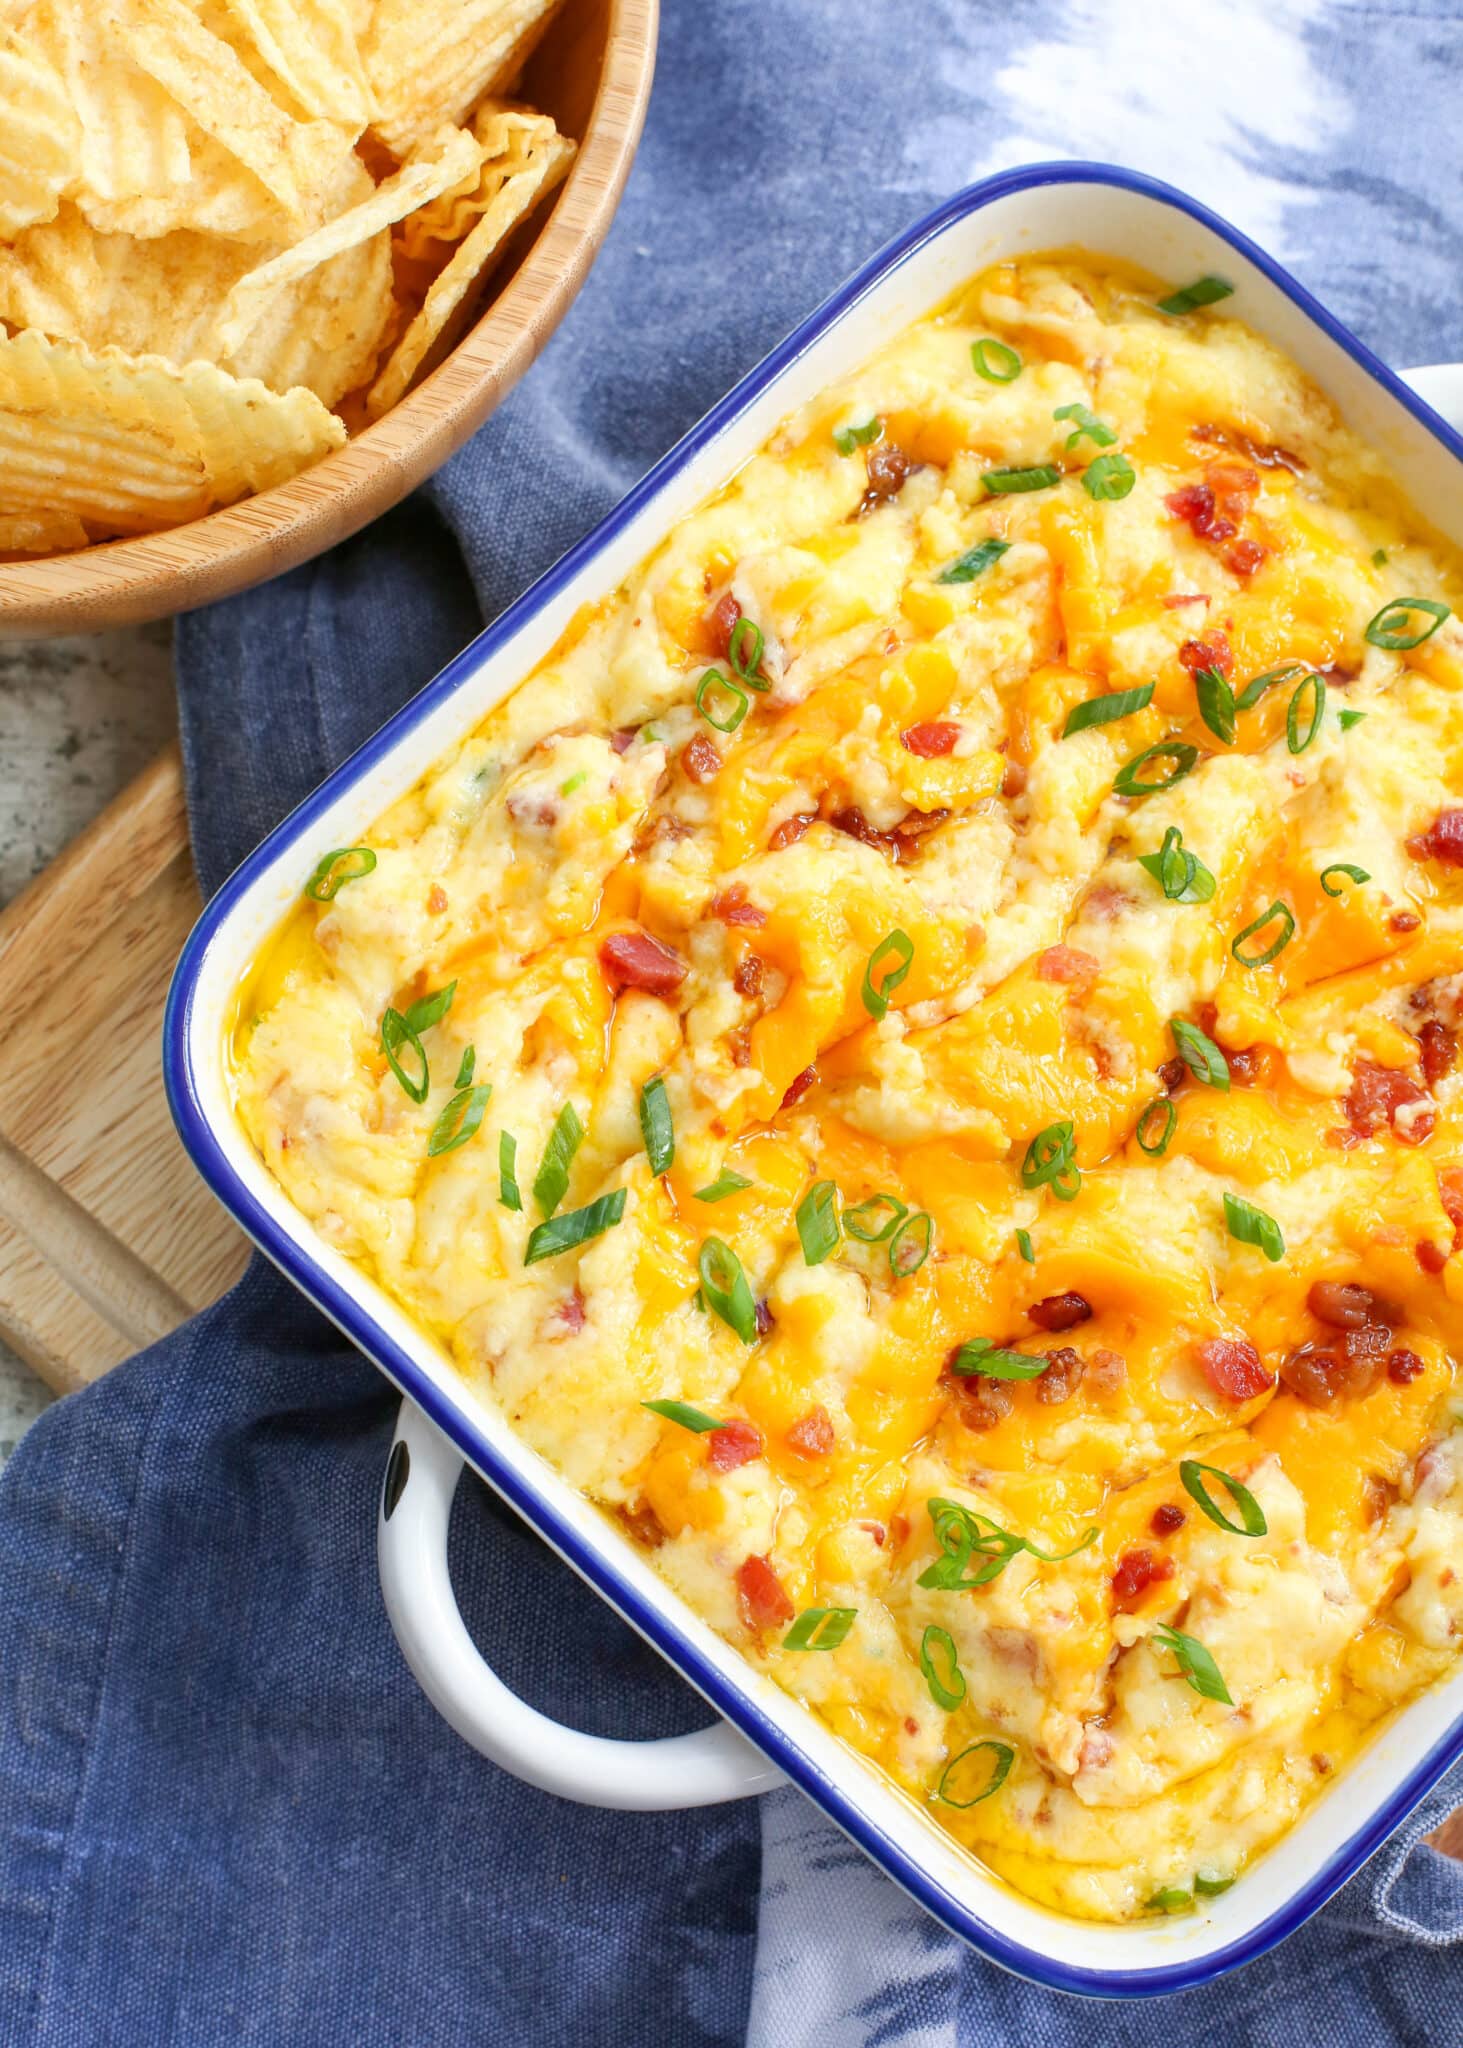 Everyone loves Twice Baked Potatoes and this dip maximizes that flavor combo in an EASY crowd friendly recipe! get the details at barefeetinthekitchen.com